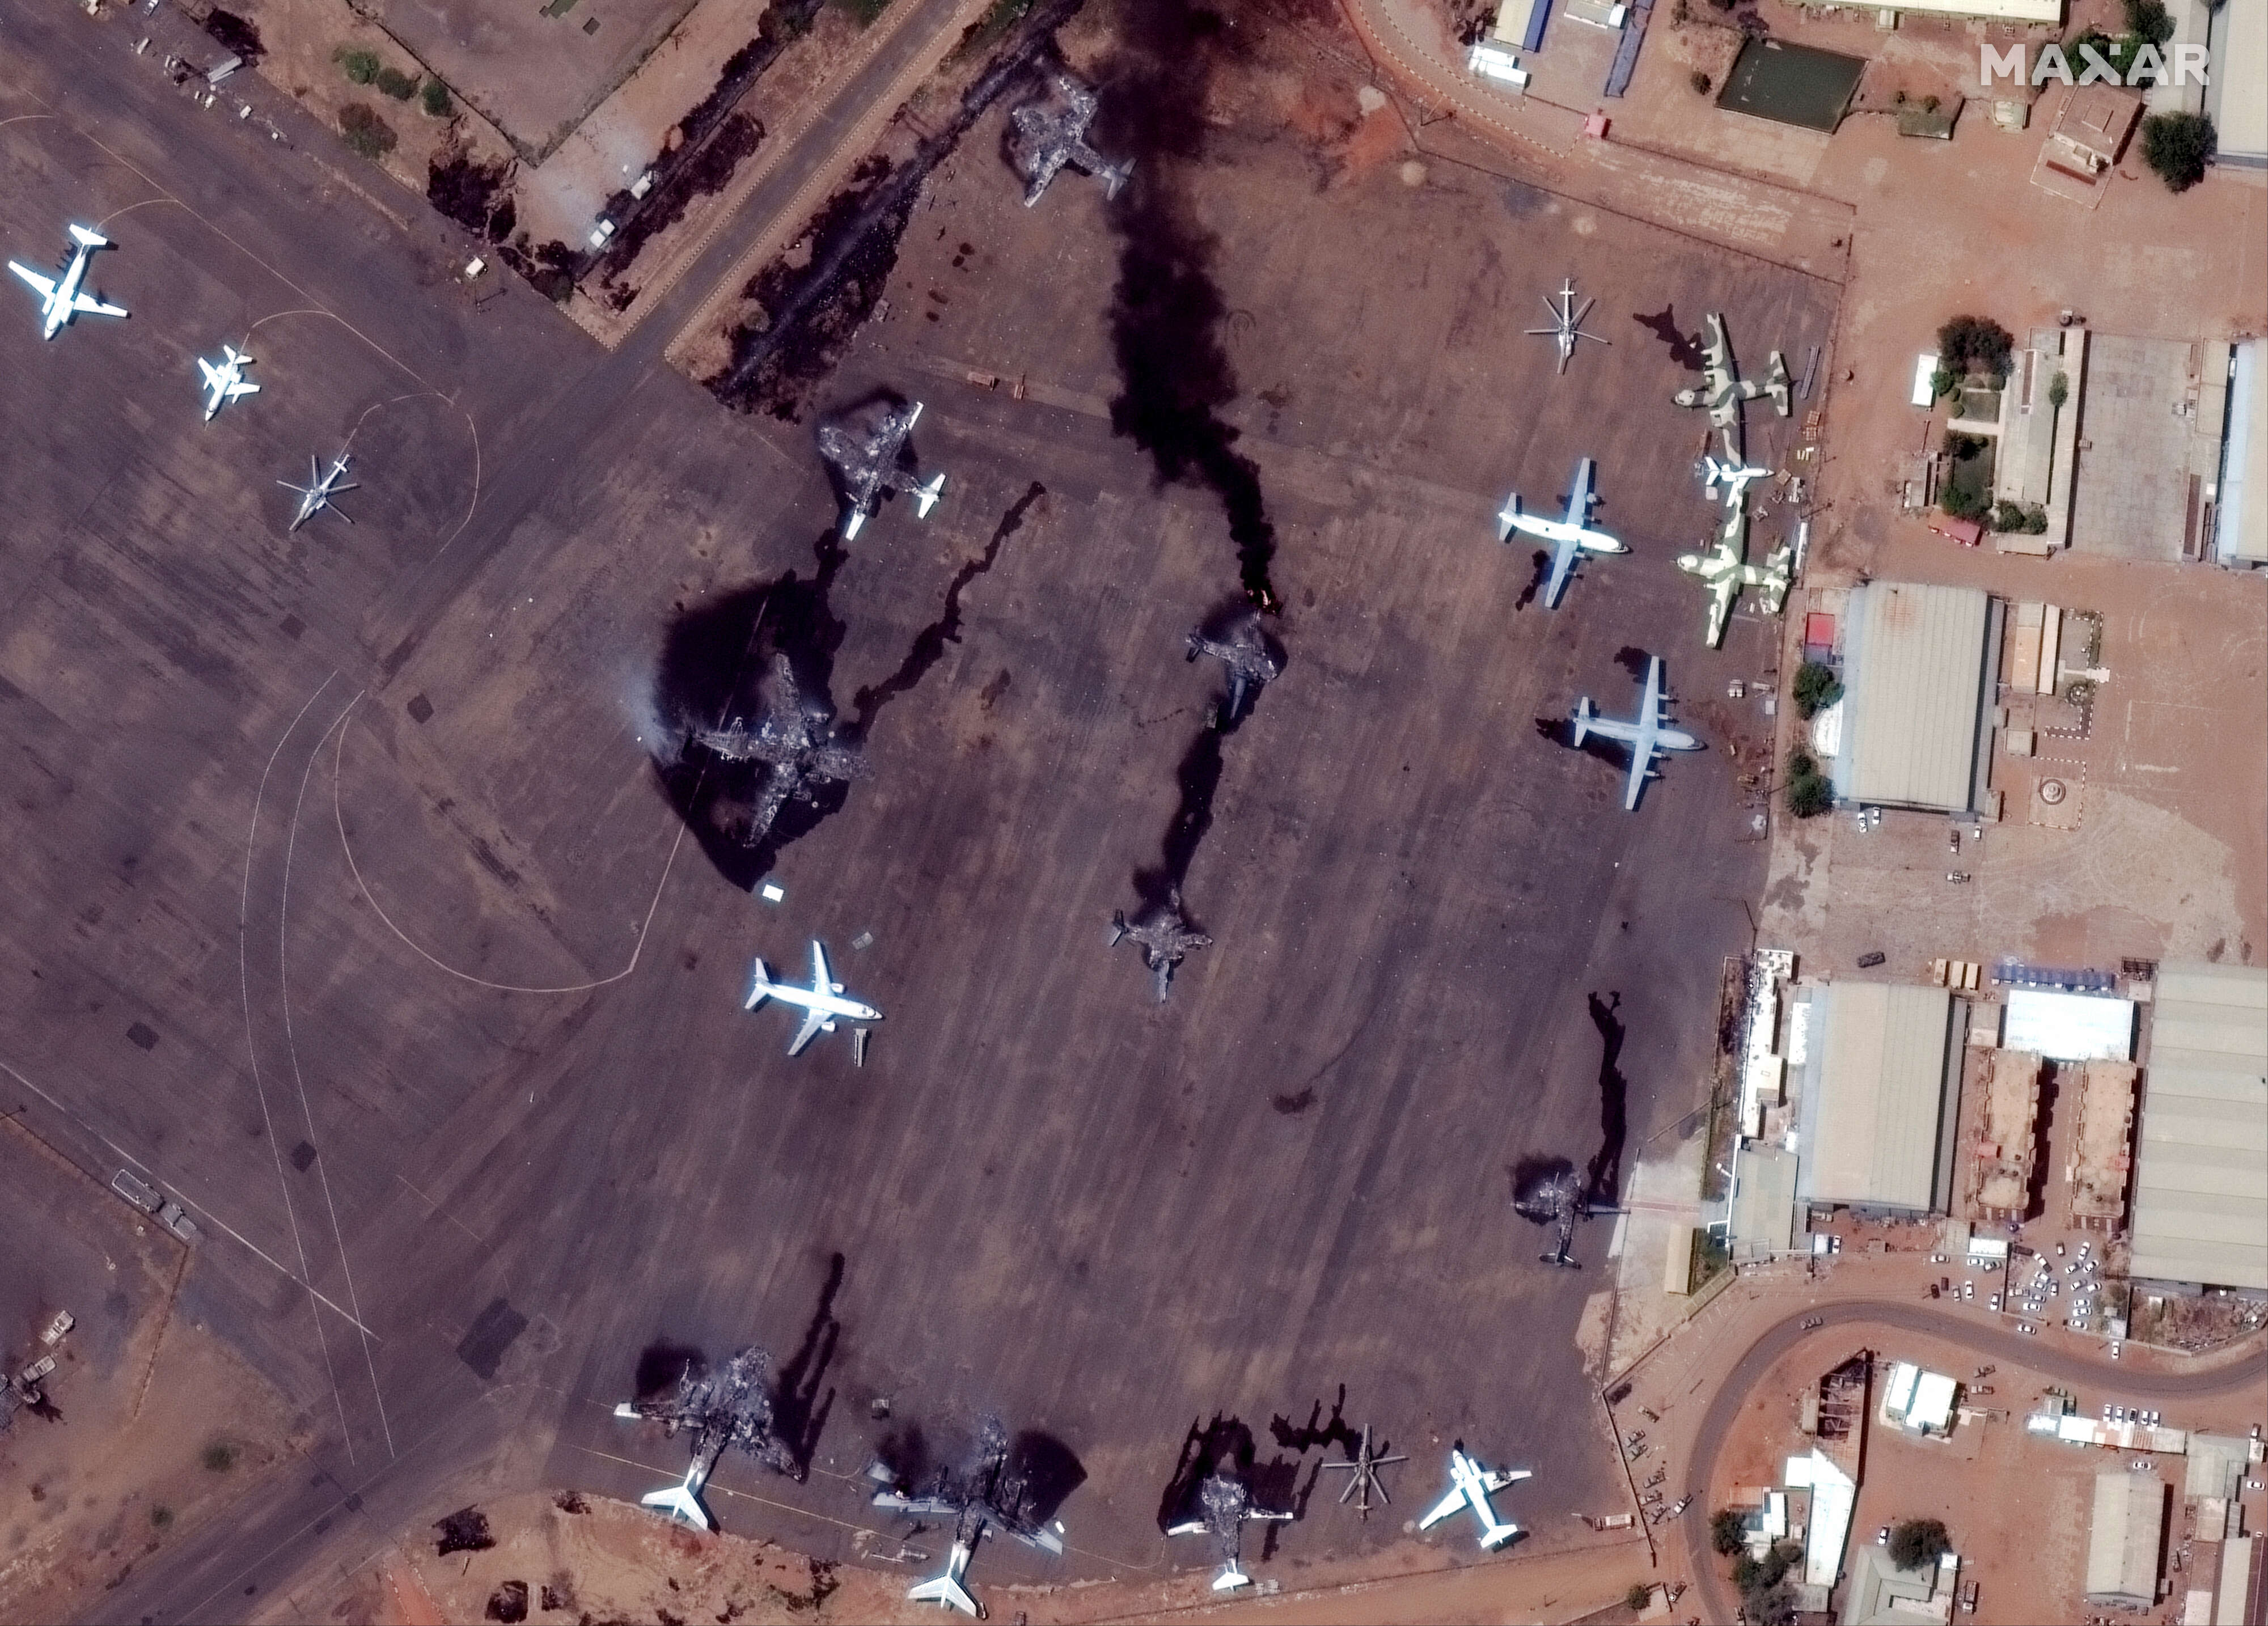 Satellite image shows a view of destroyed airplanes at Khartoum International Airport